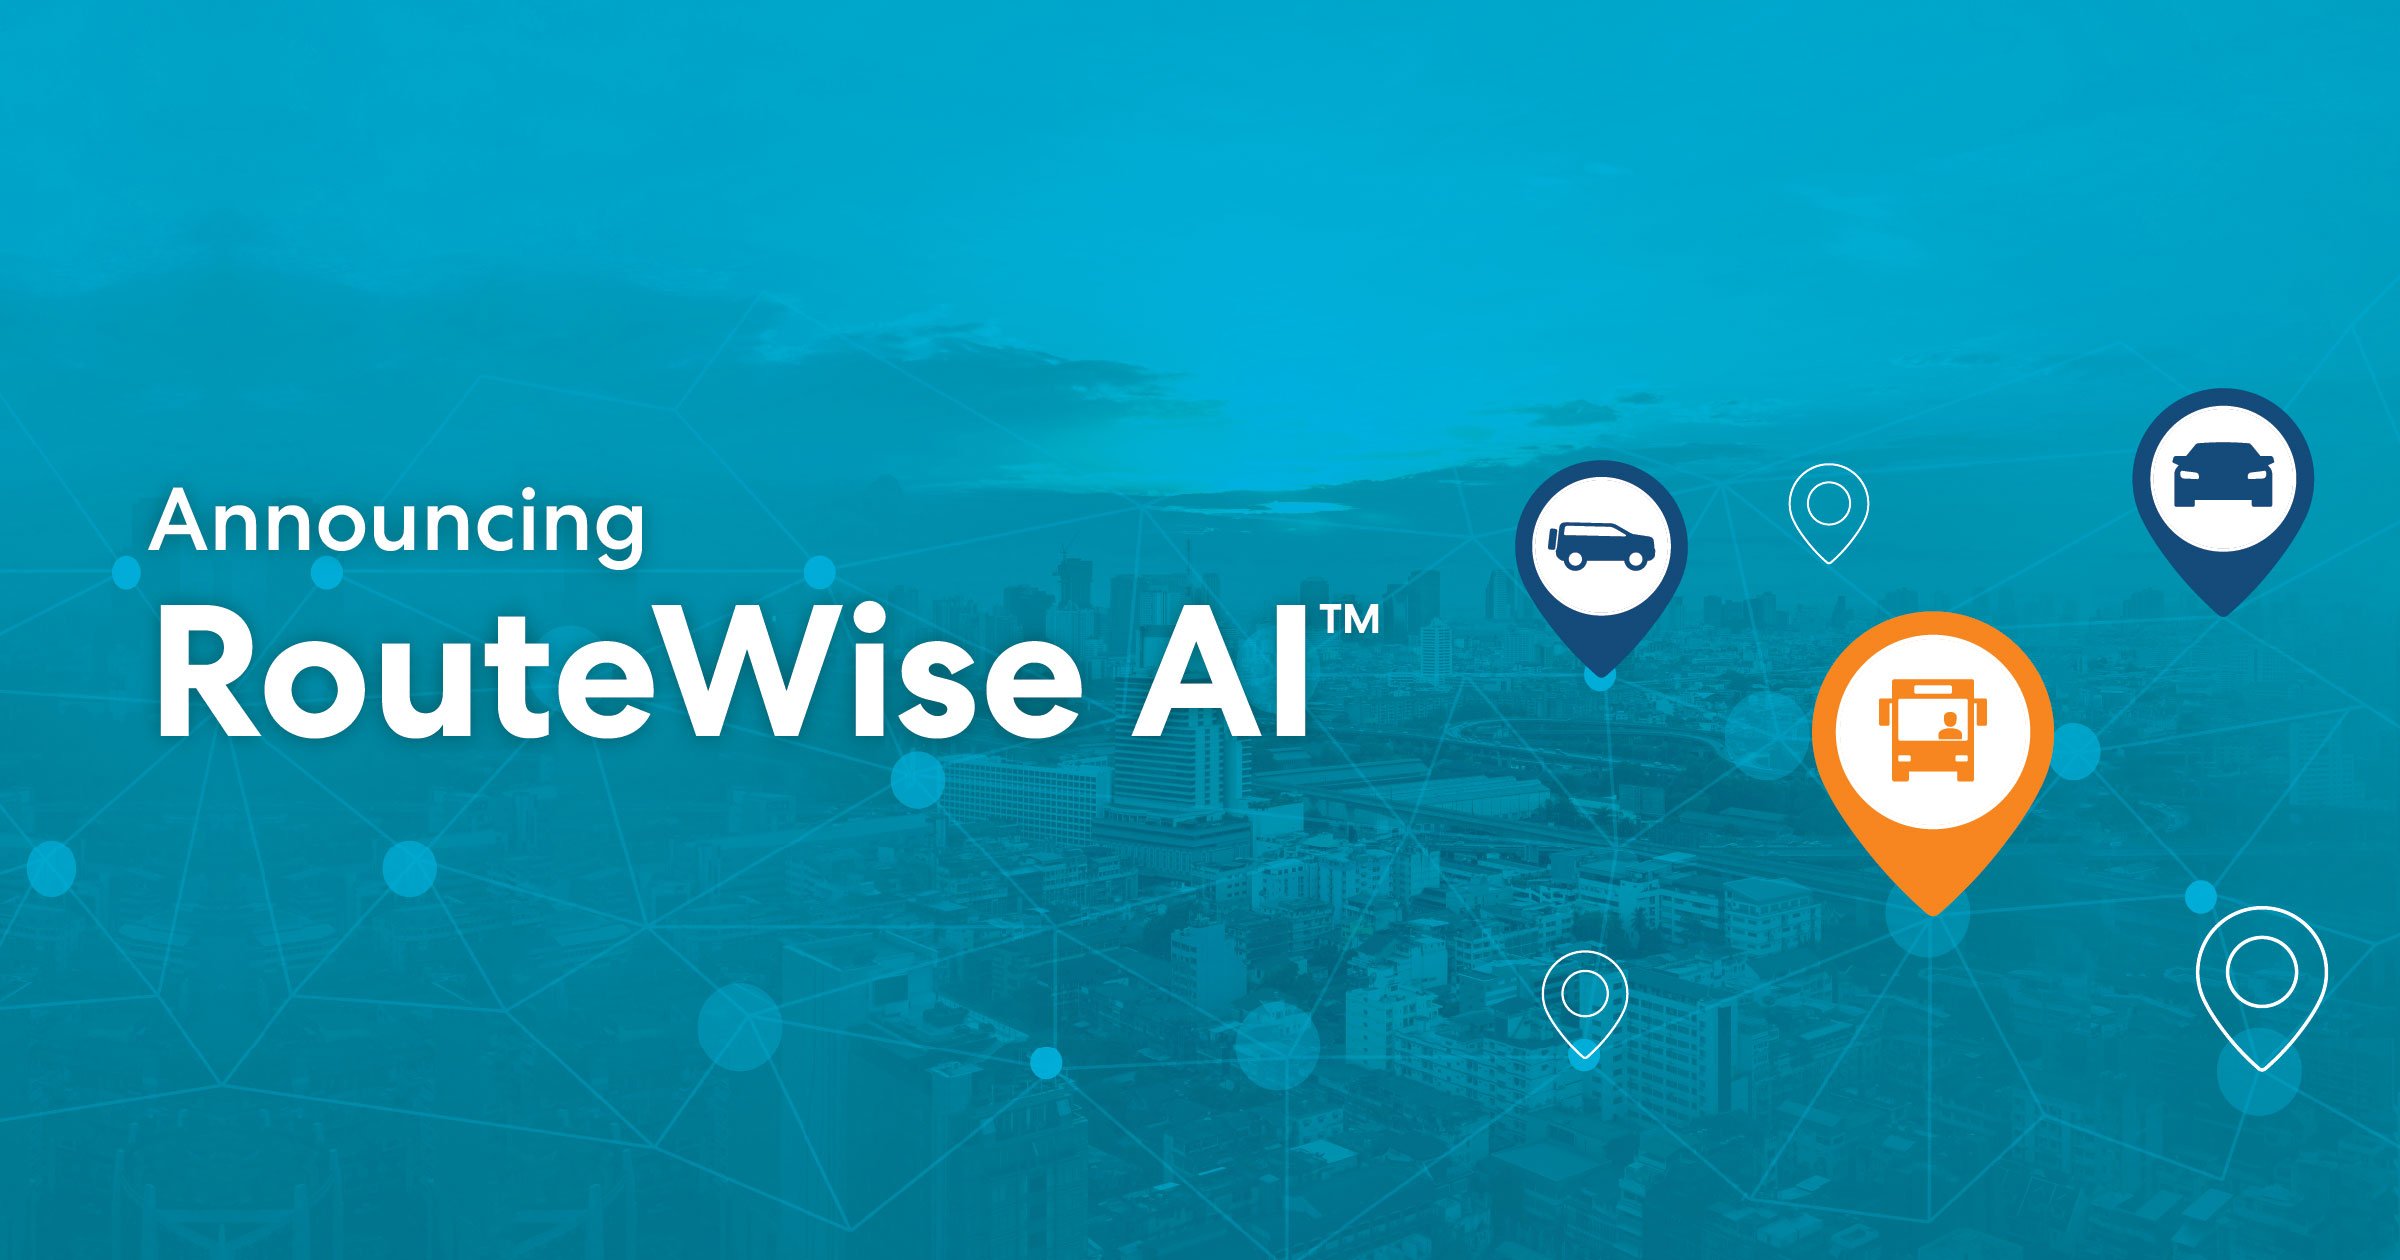 Meet RouteWise AI™, our new name for Strategic Routing